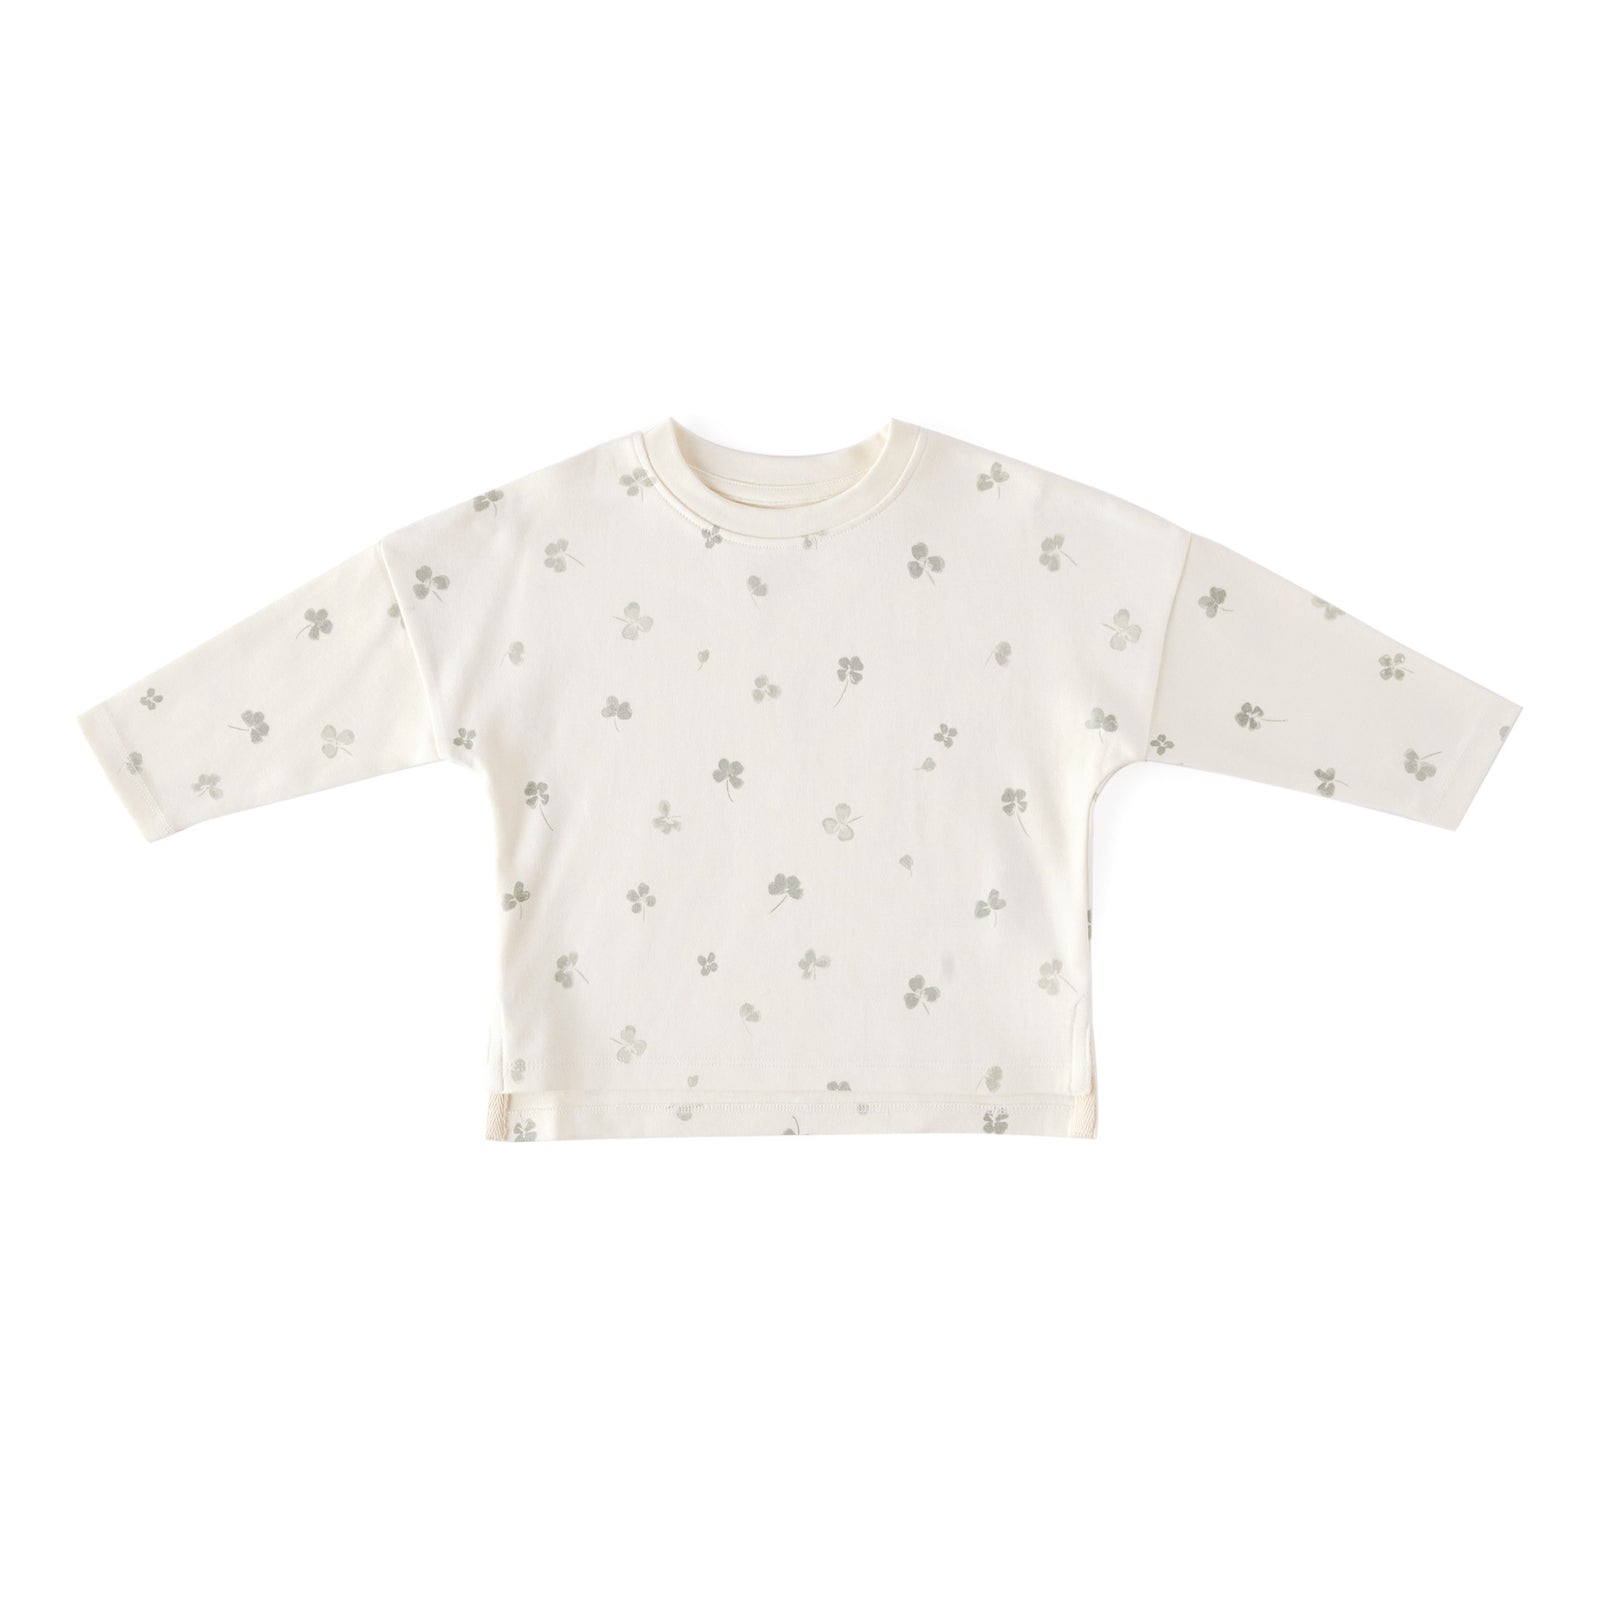 Dropped Shoulder Long Sleeve Top Pehr Canada Clover 18 - 24 mos. 